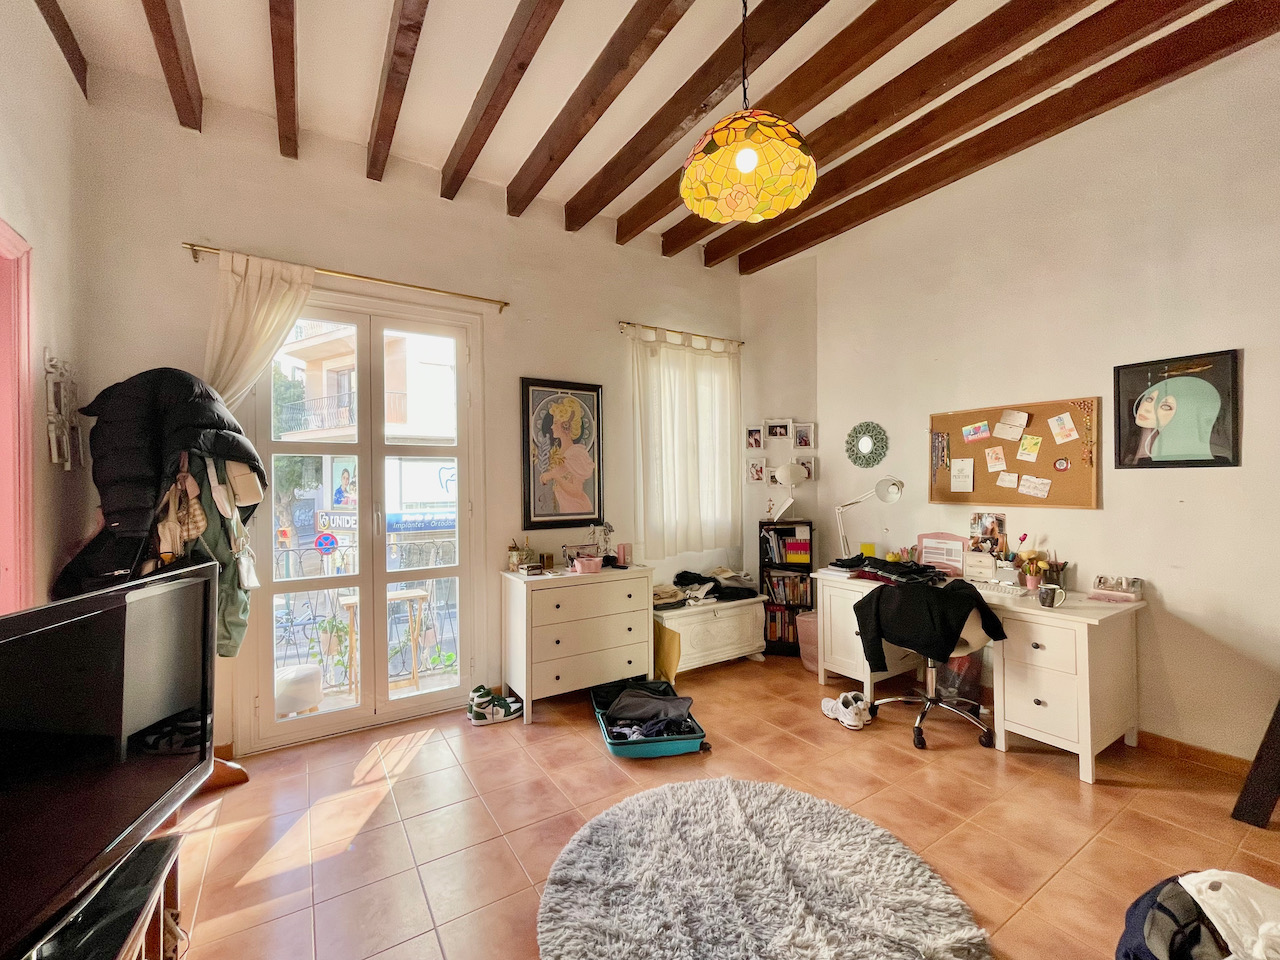 Spacious and bright flat in Caro street, modern rustic style.